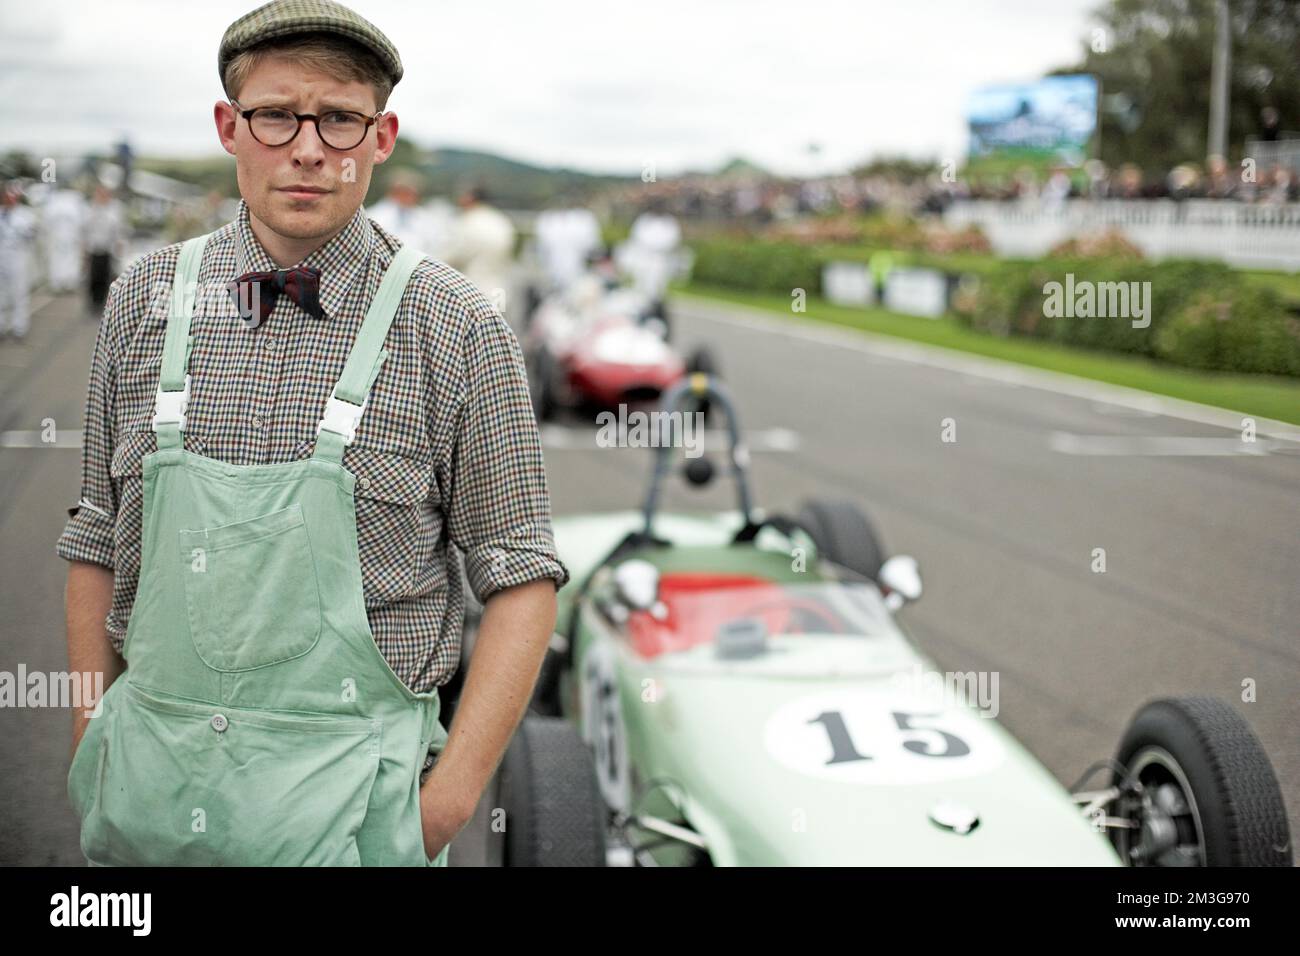 Mechanic in the pits, racing, car racing, classic car, Chichester, Sussex, United Kingdom, Great Britain Stock Photo